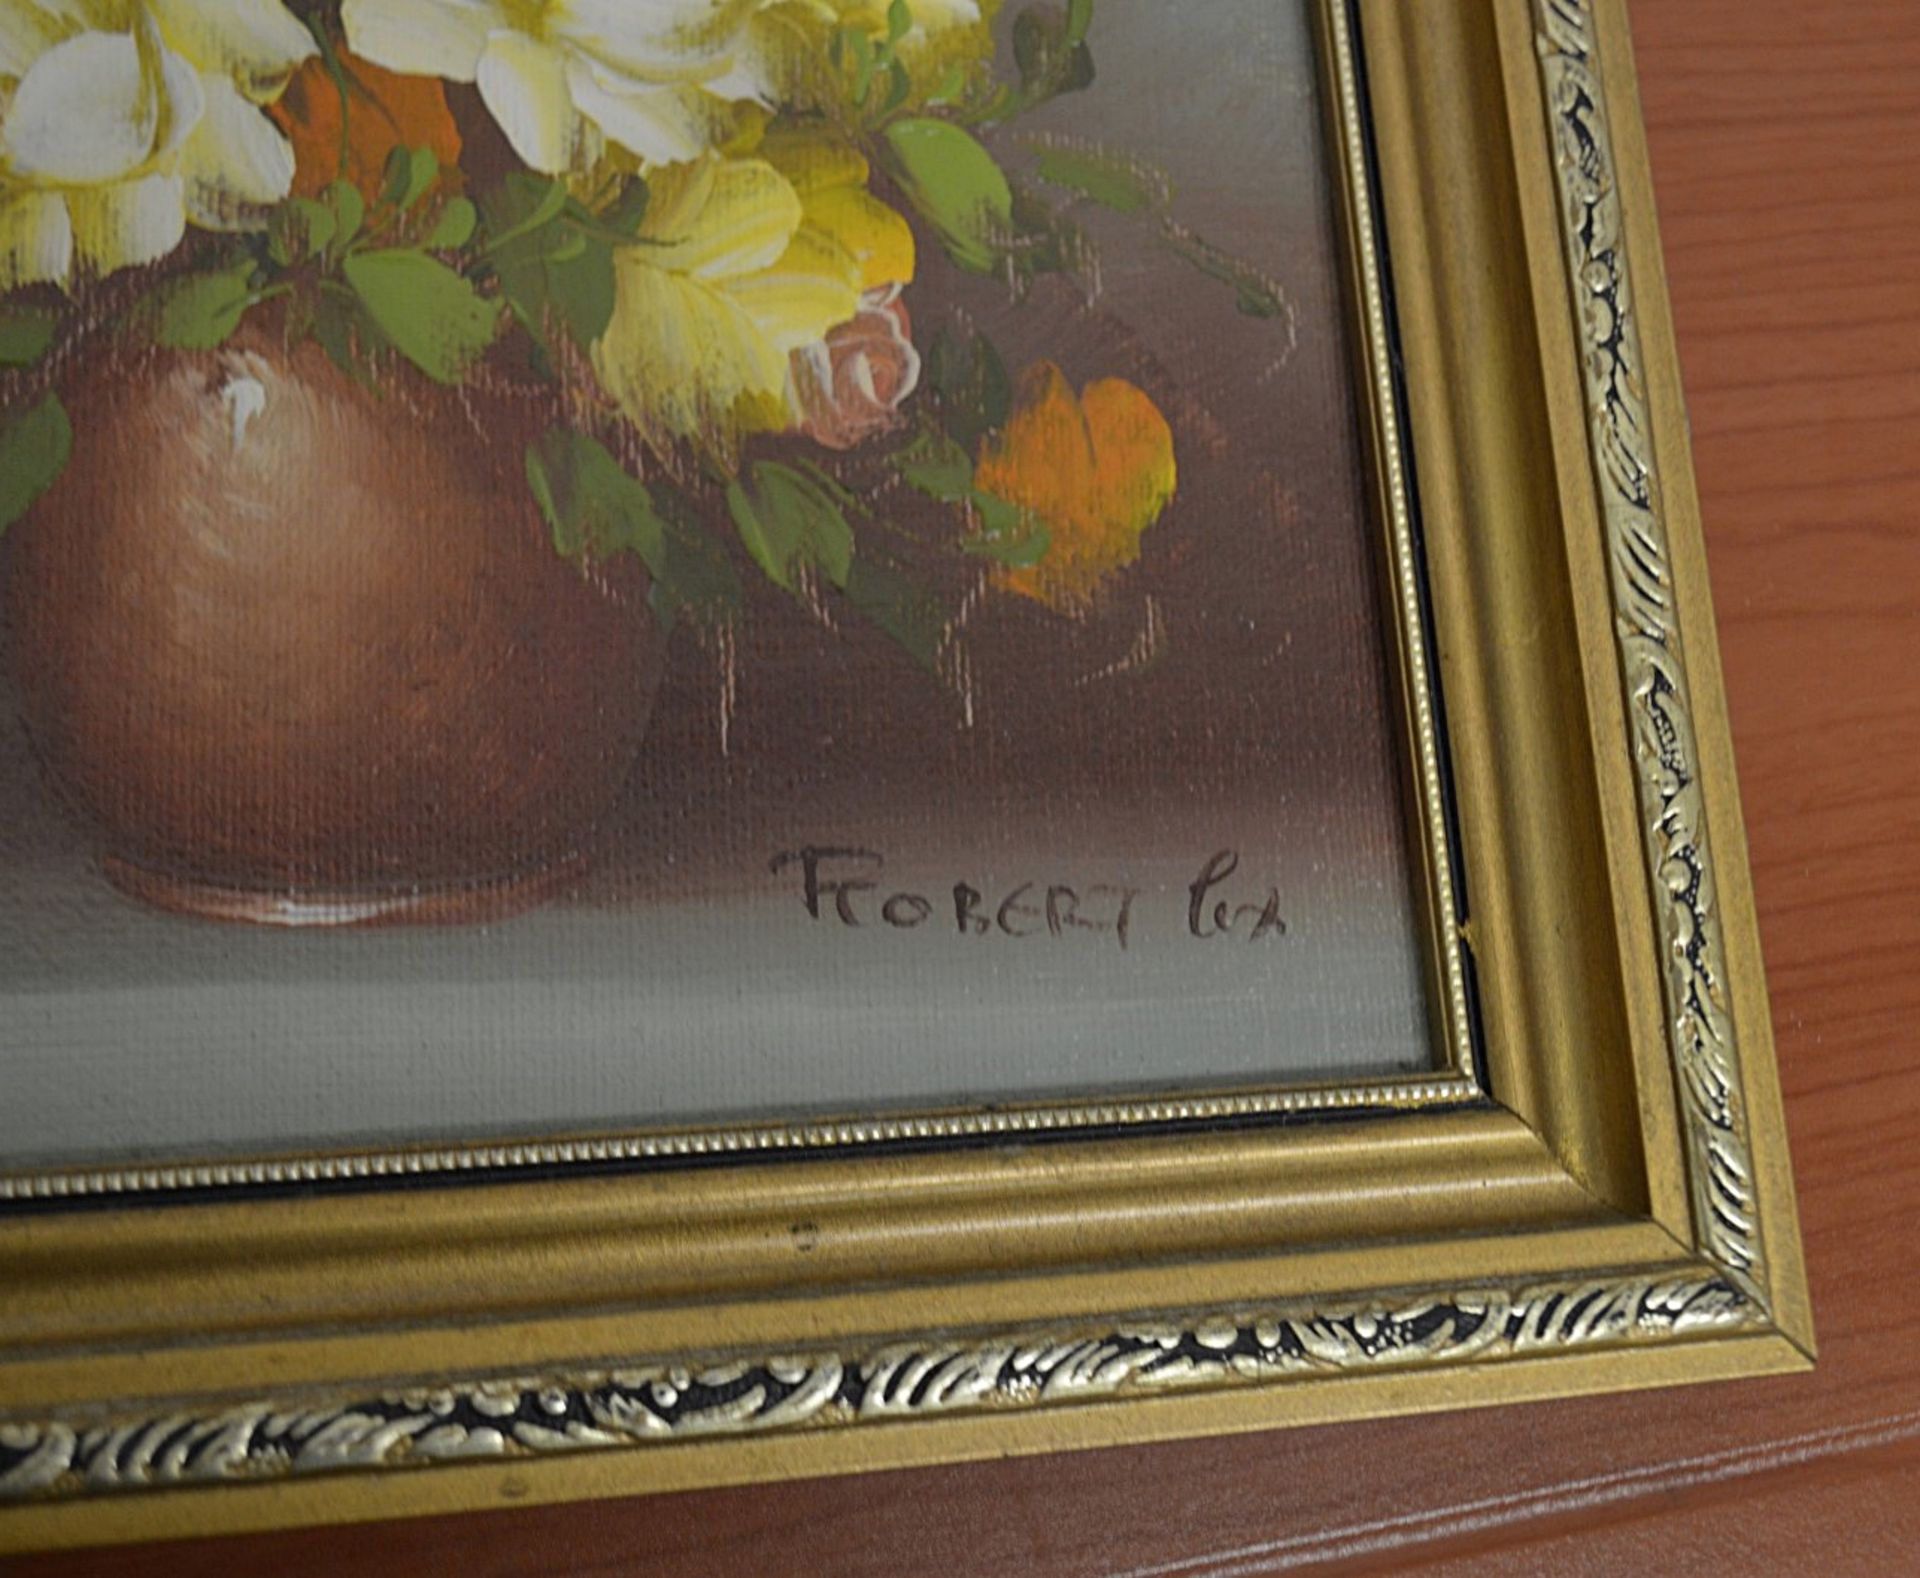 1 x Original Oil Painting Of Flowers On Board - Signed By The Artist - Dimensions: 25 x 30cm - - Image 6 of 6